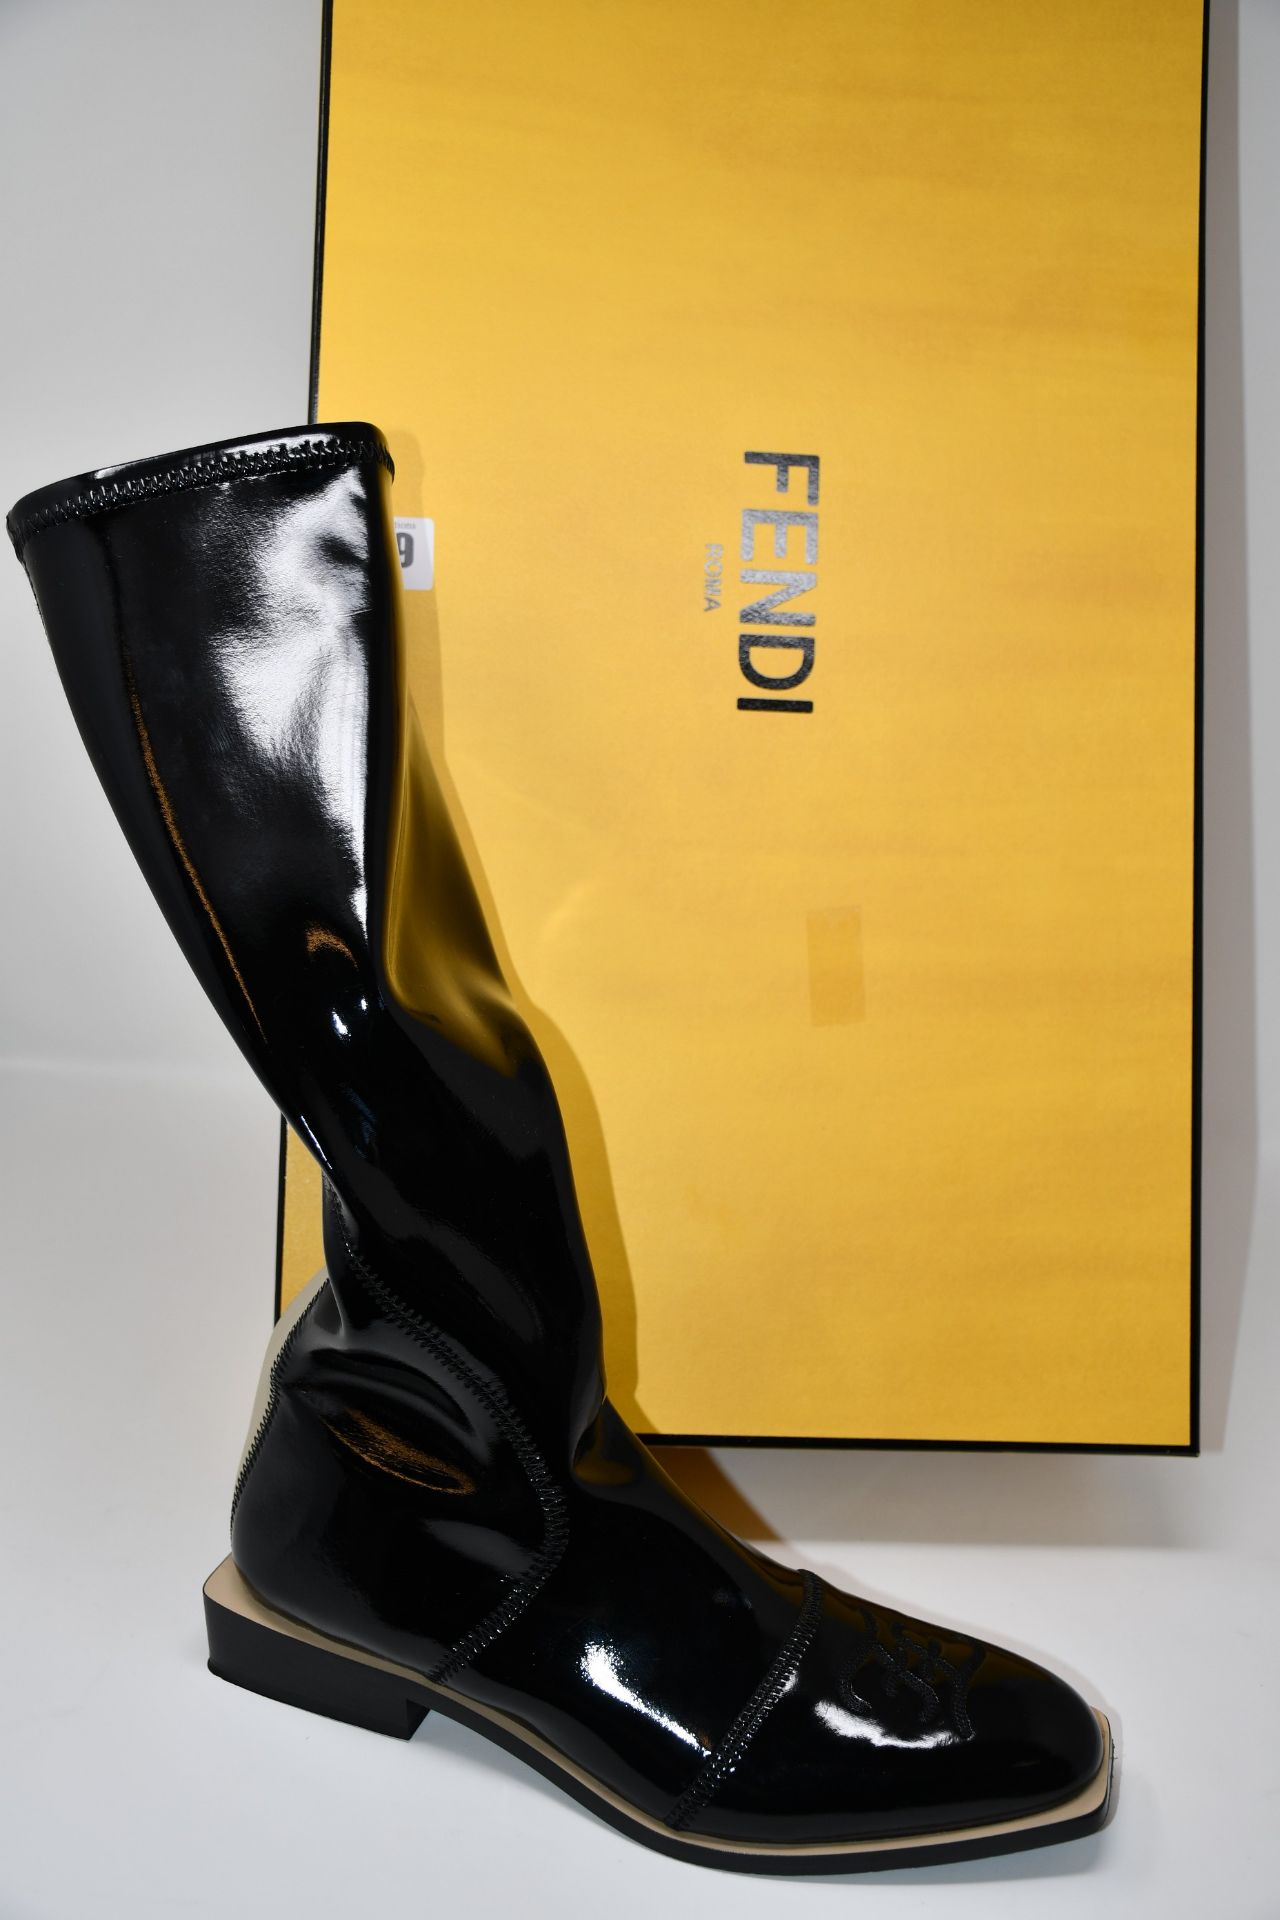 A pair of pre-owned Fendi boots (Very good condition, just slight signs of wear on sole - EU 40).